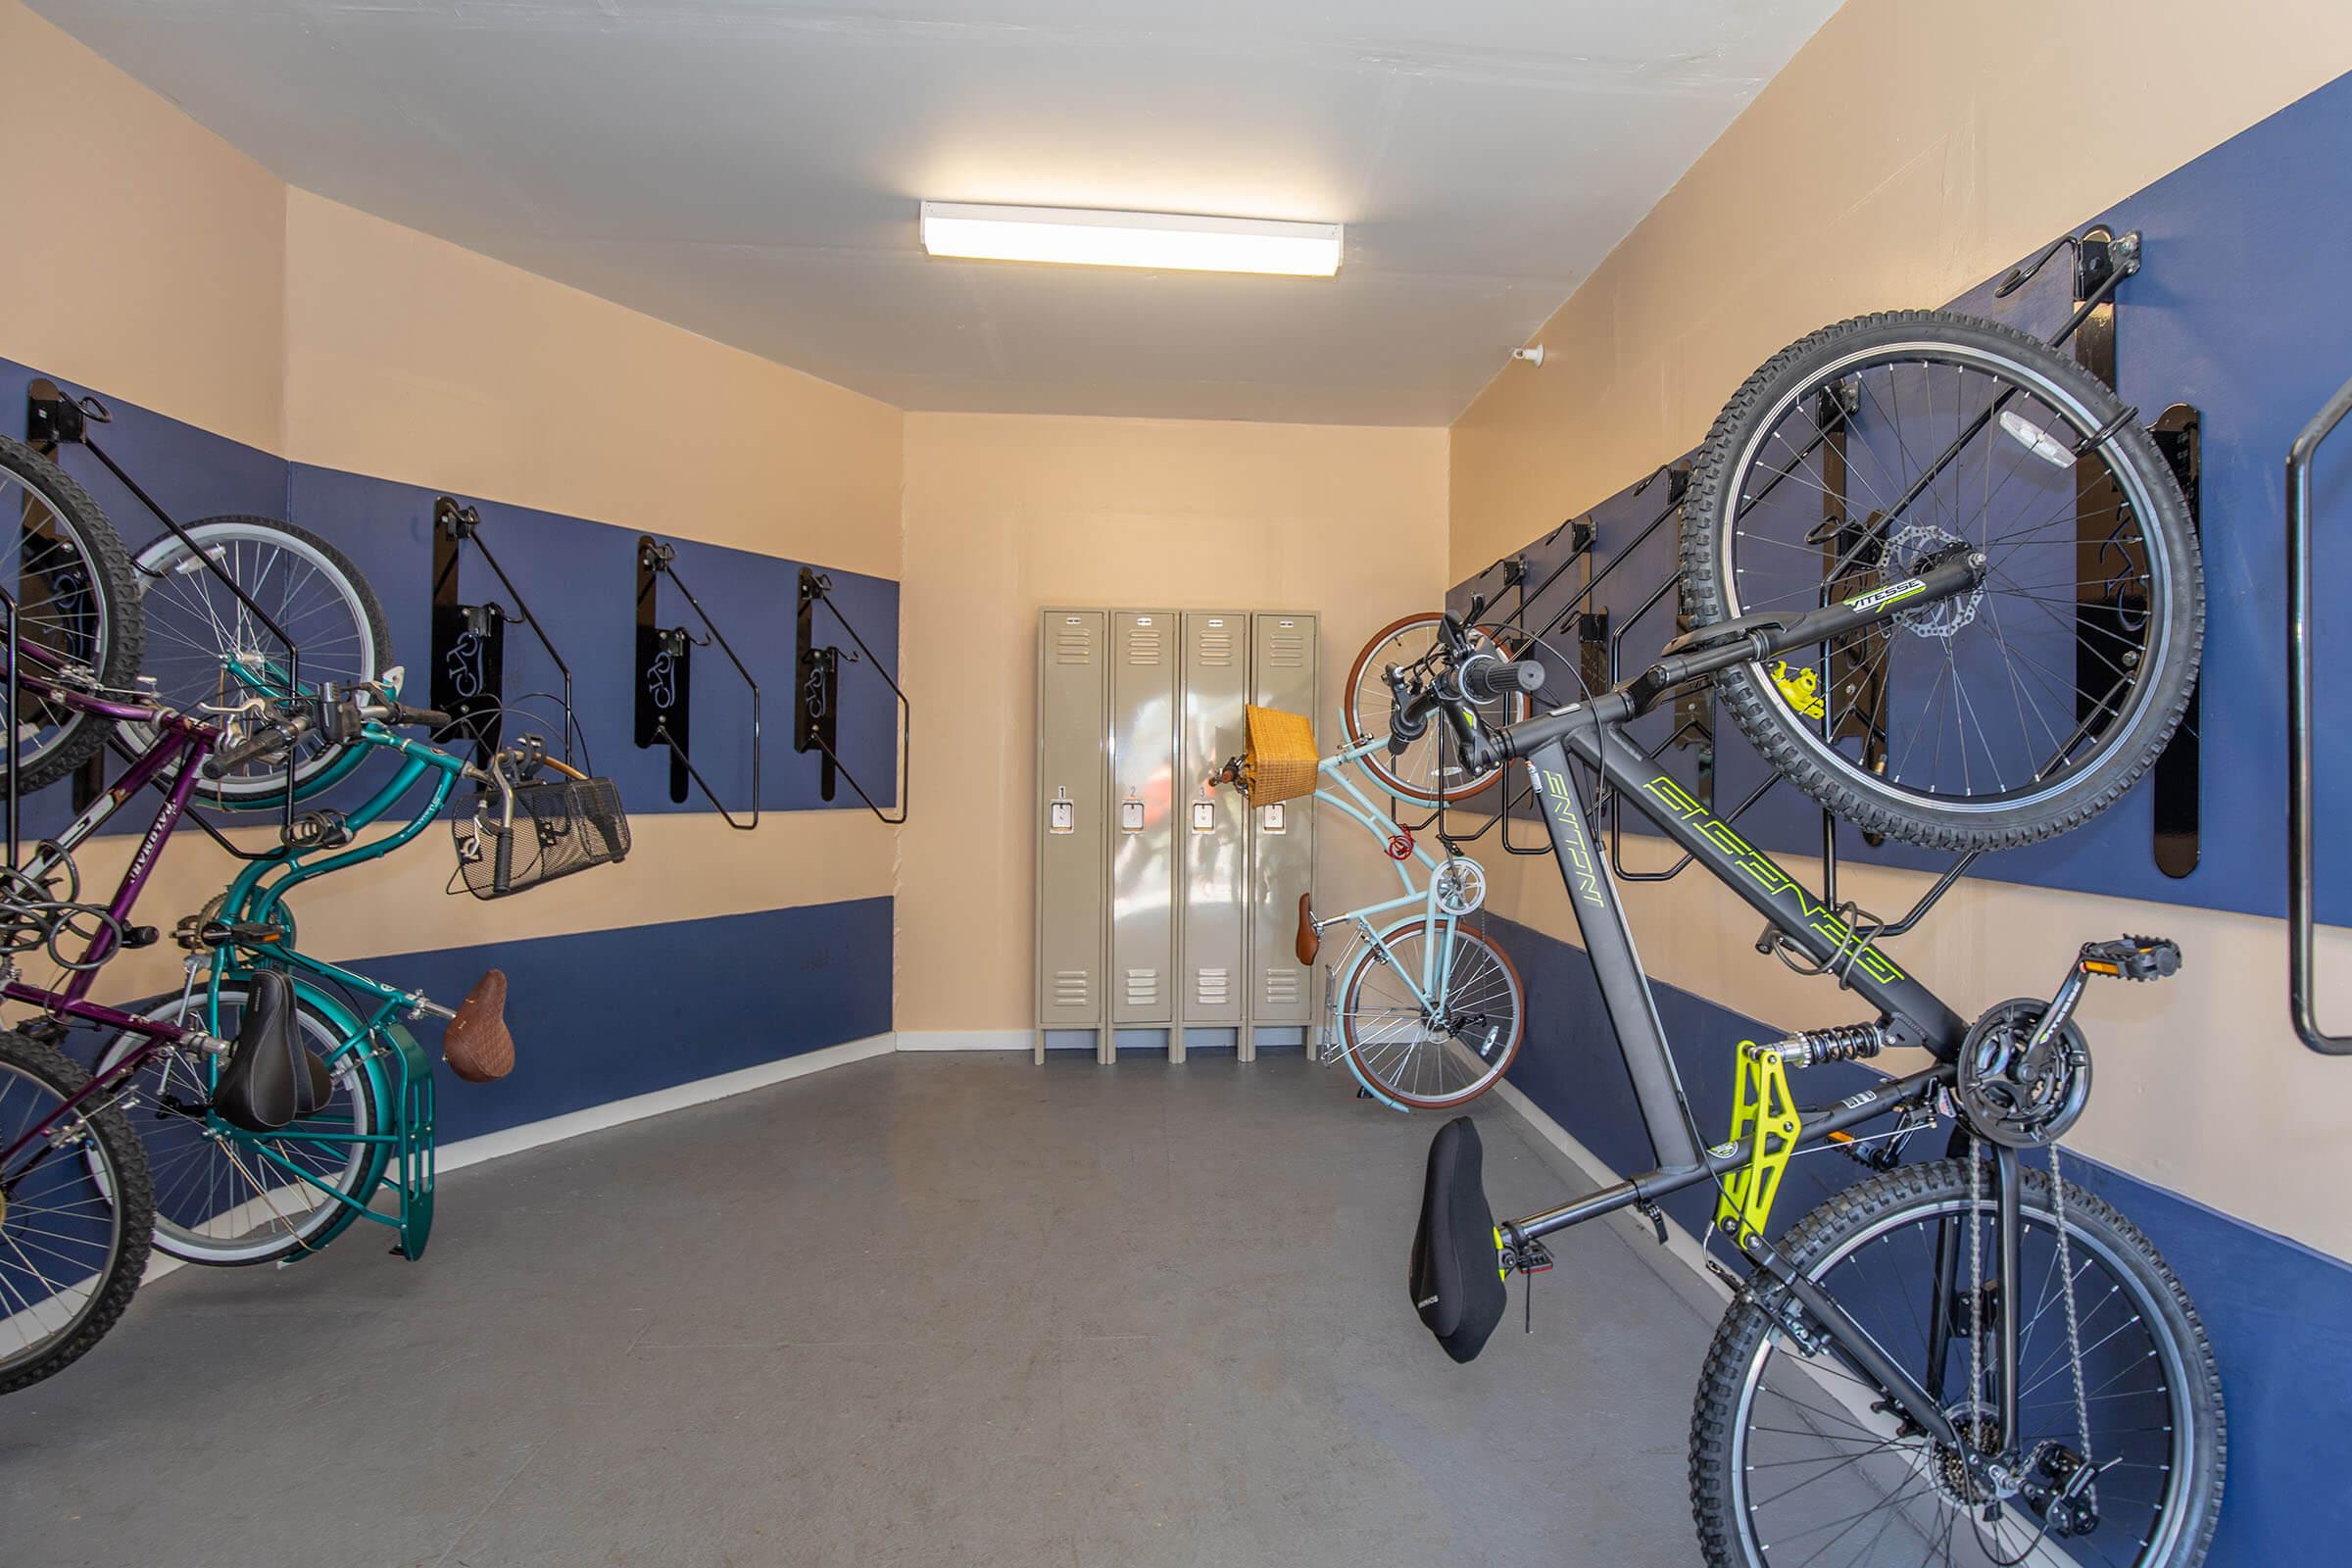 a bicycle parked on the side of the room